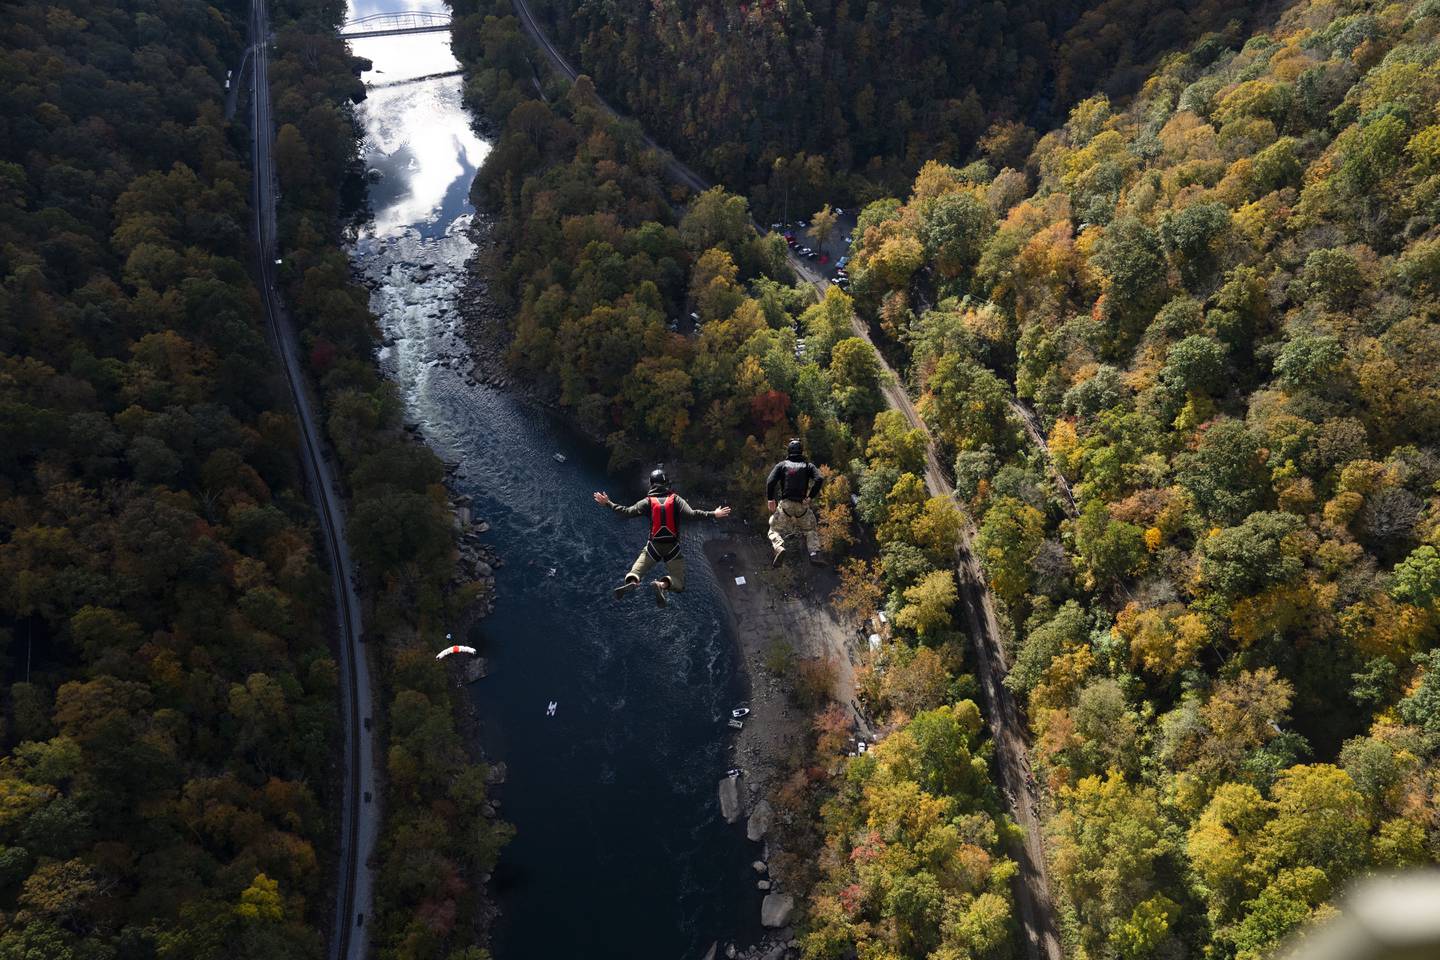 People from all over the world base jump off of the bridge during Bridge Day, an annual celebration of the famous New River Gorge Bridge in West Virginia. The bridge is currently the longest single-span steel arch bridge in the United States and the third highest bridge in the country.